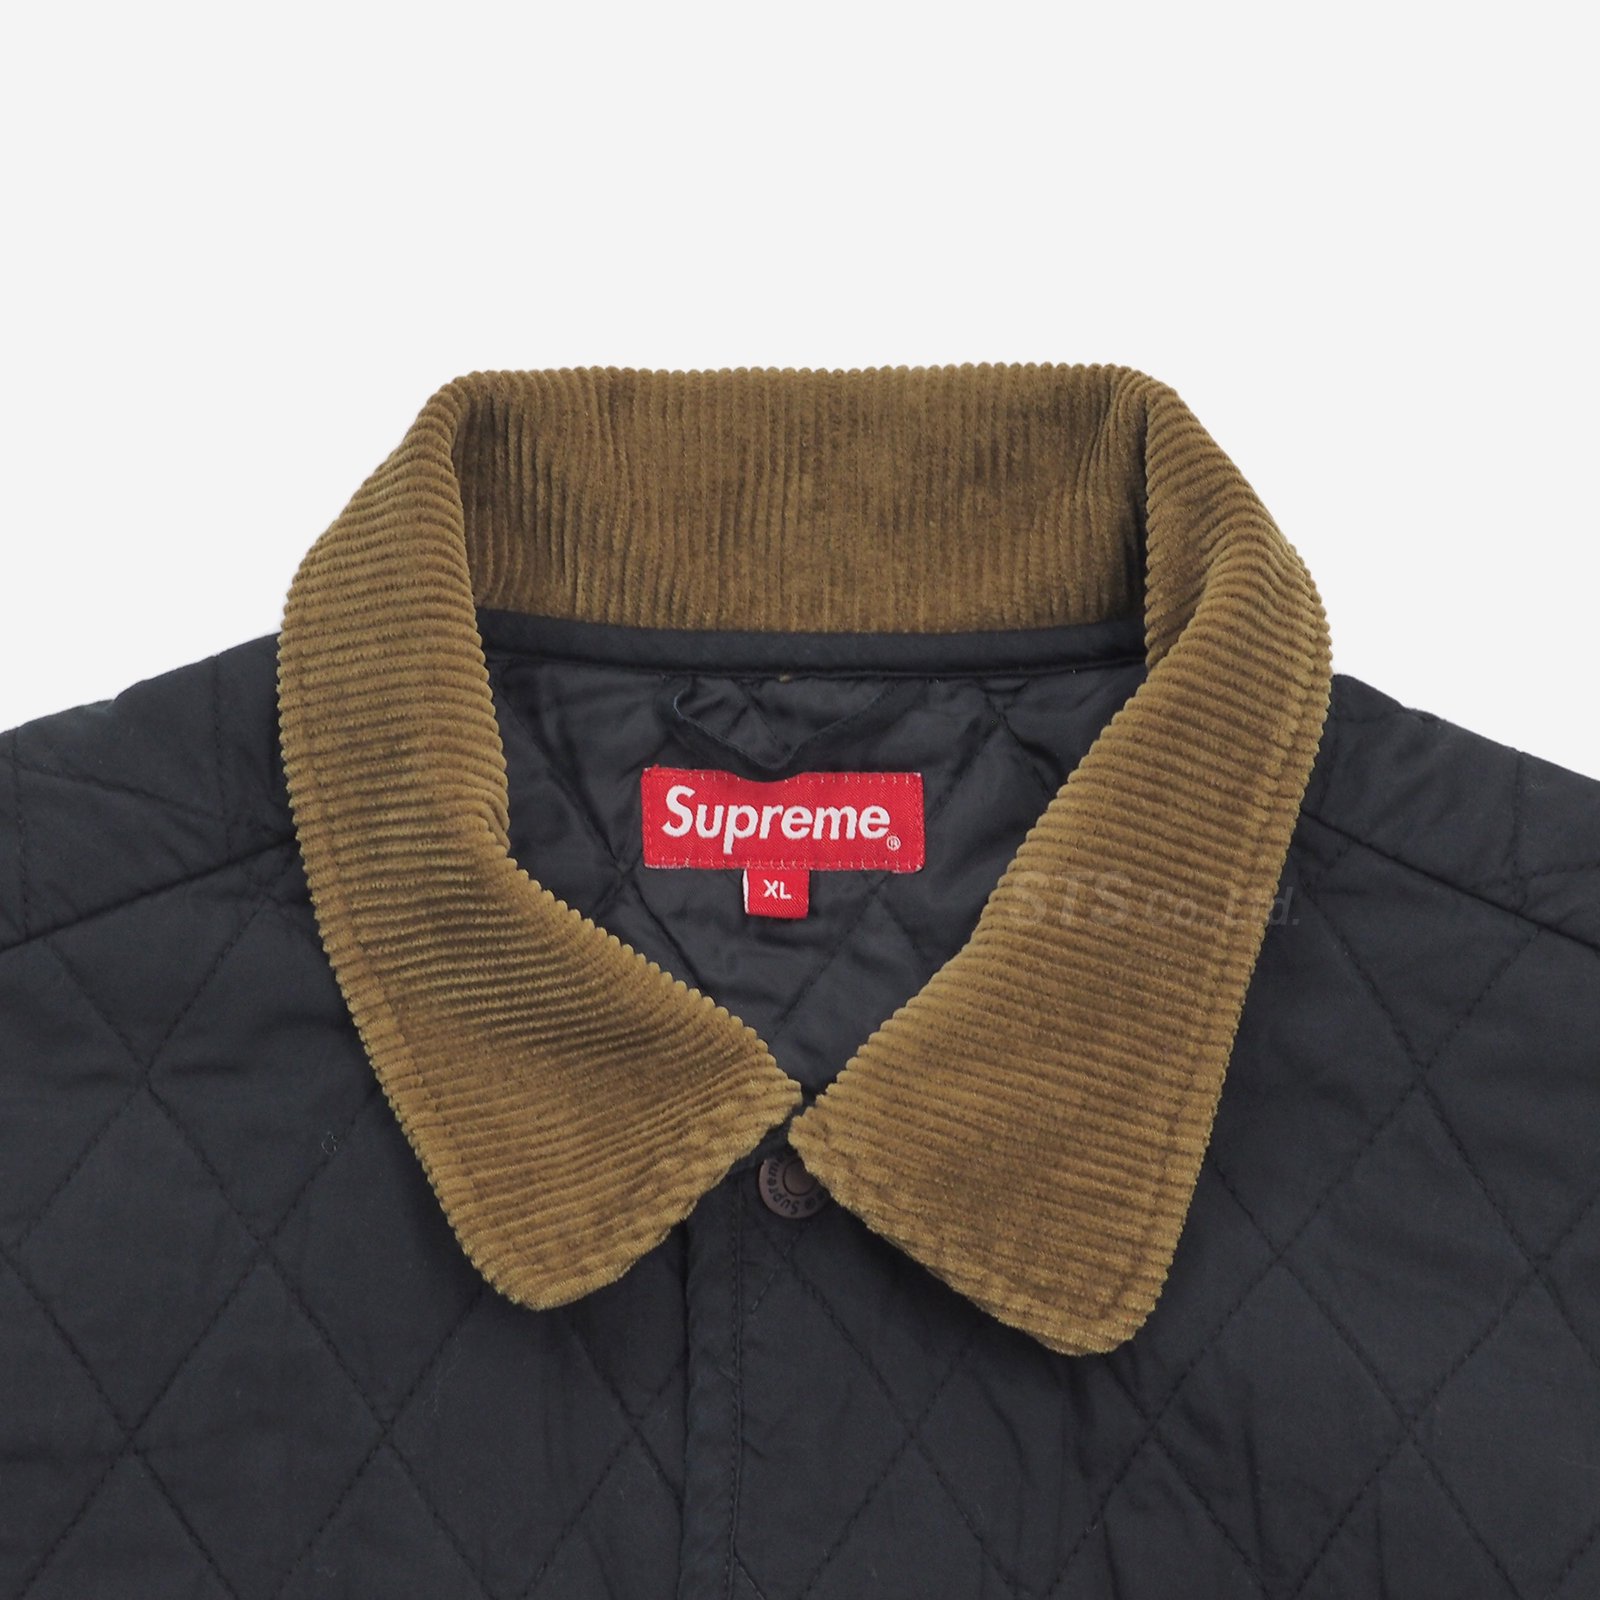 Supreme Quilted Paisley Jacket Black - ブルゾン